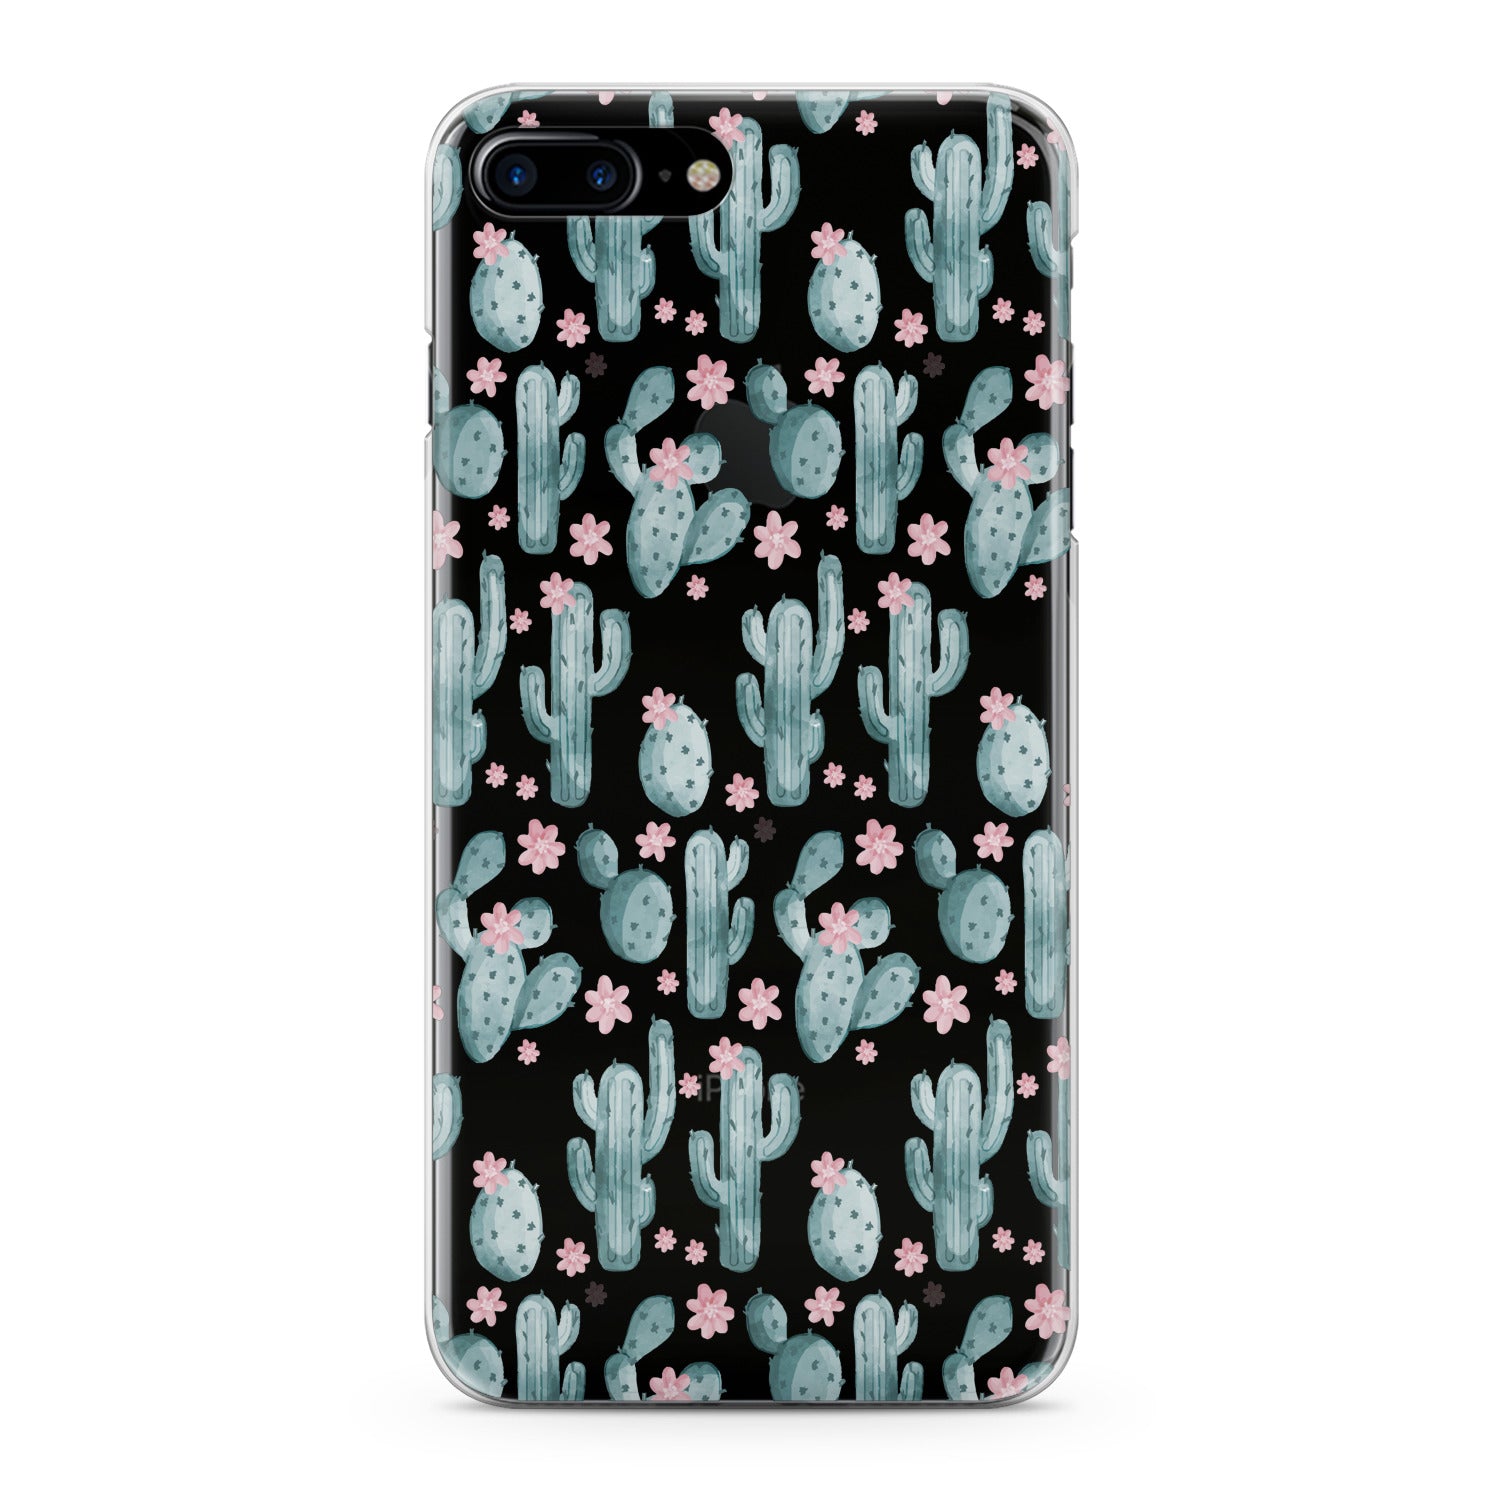 Lex Altern Cute Cactus Art Phone Case for your iPhone & Android phone.